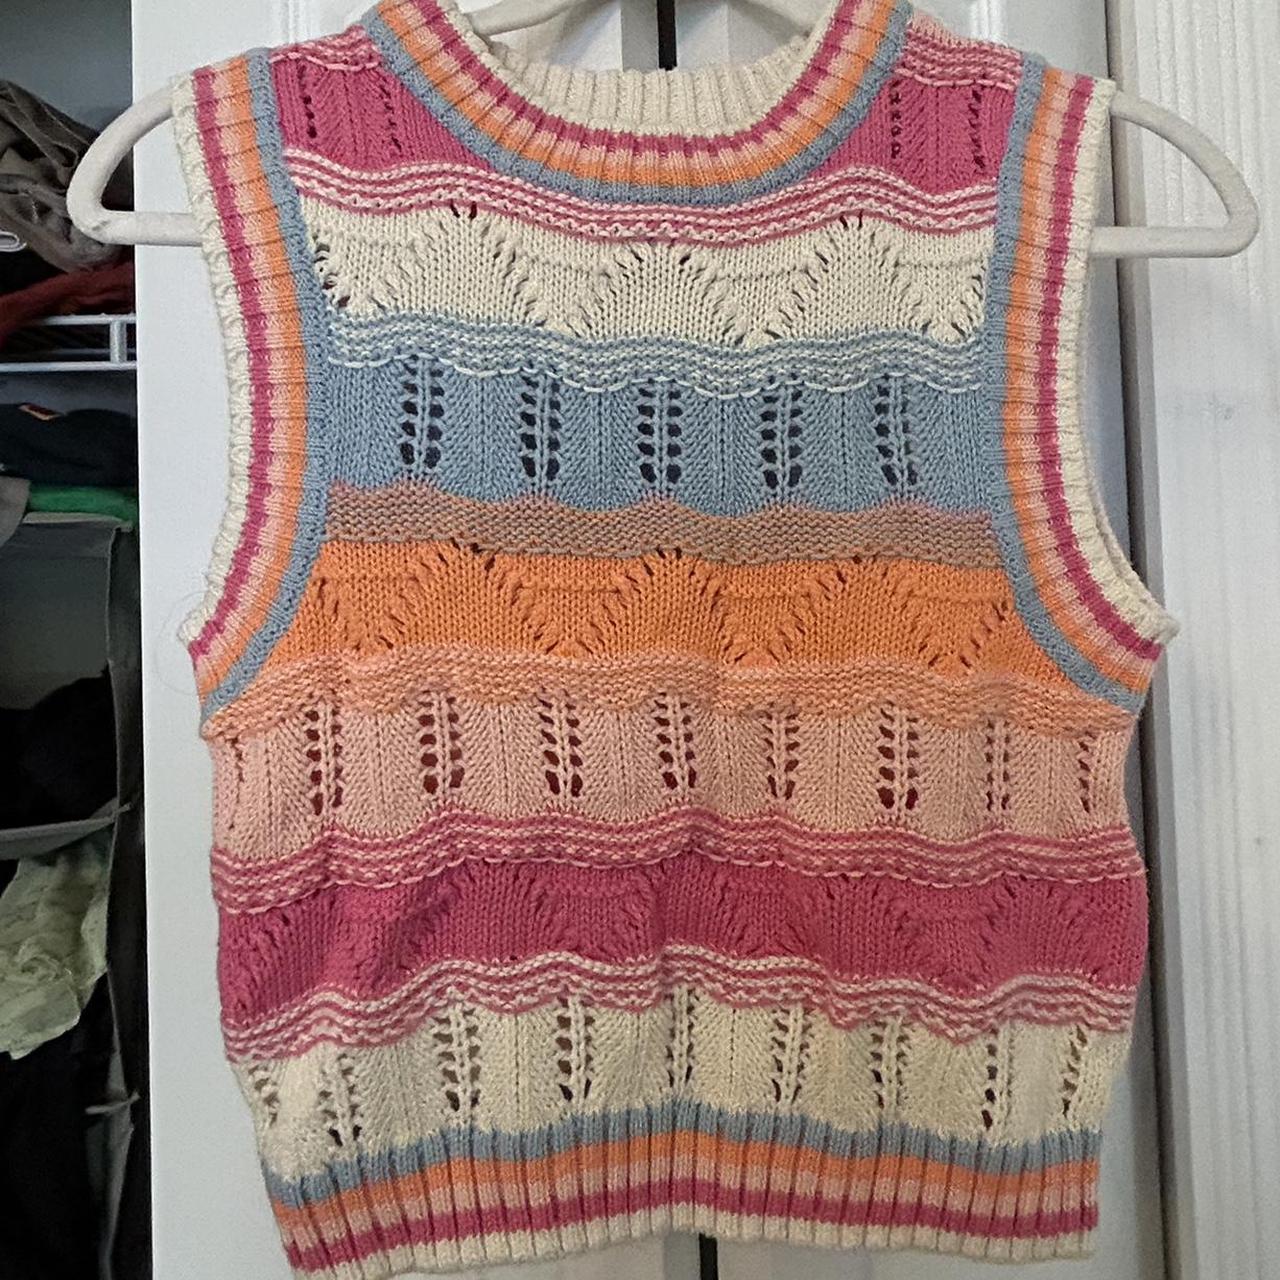 cute colorful cropped knit sweater vest from cotton   Depop